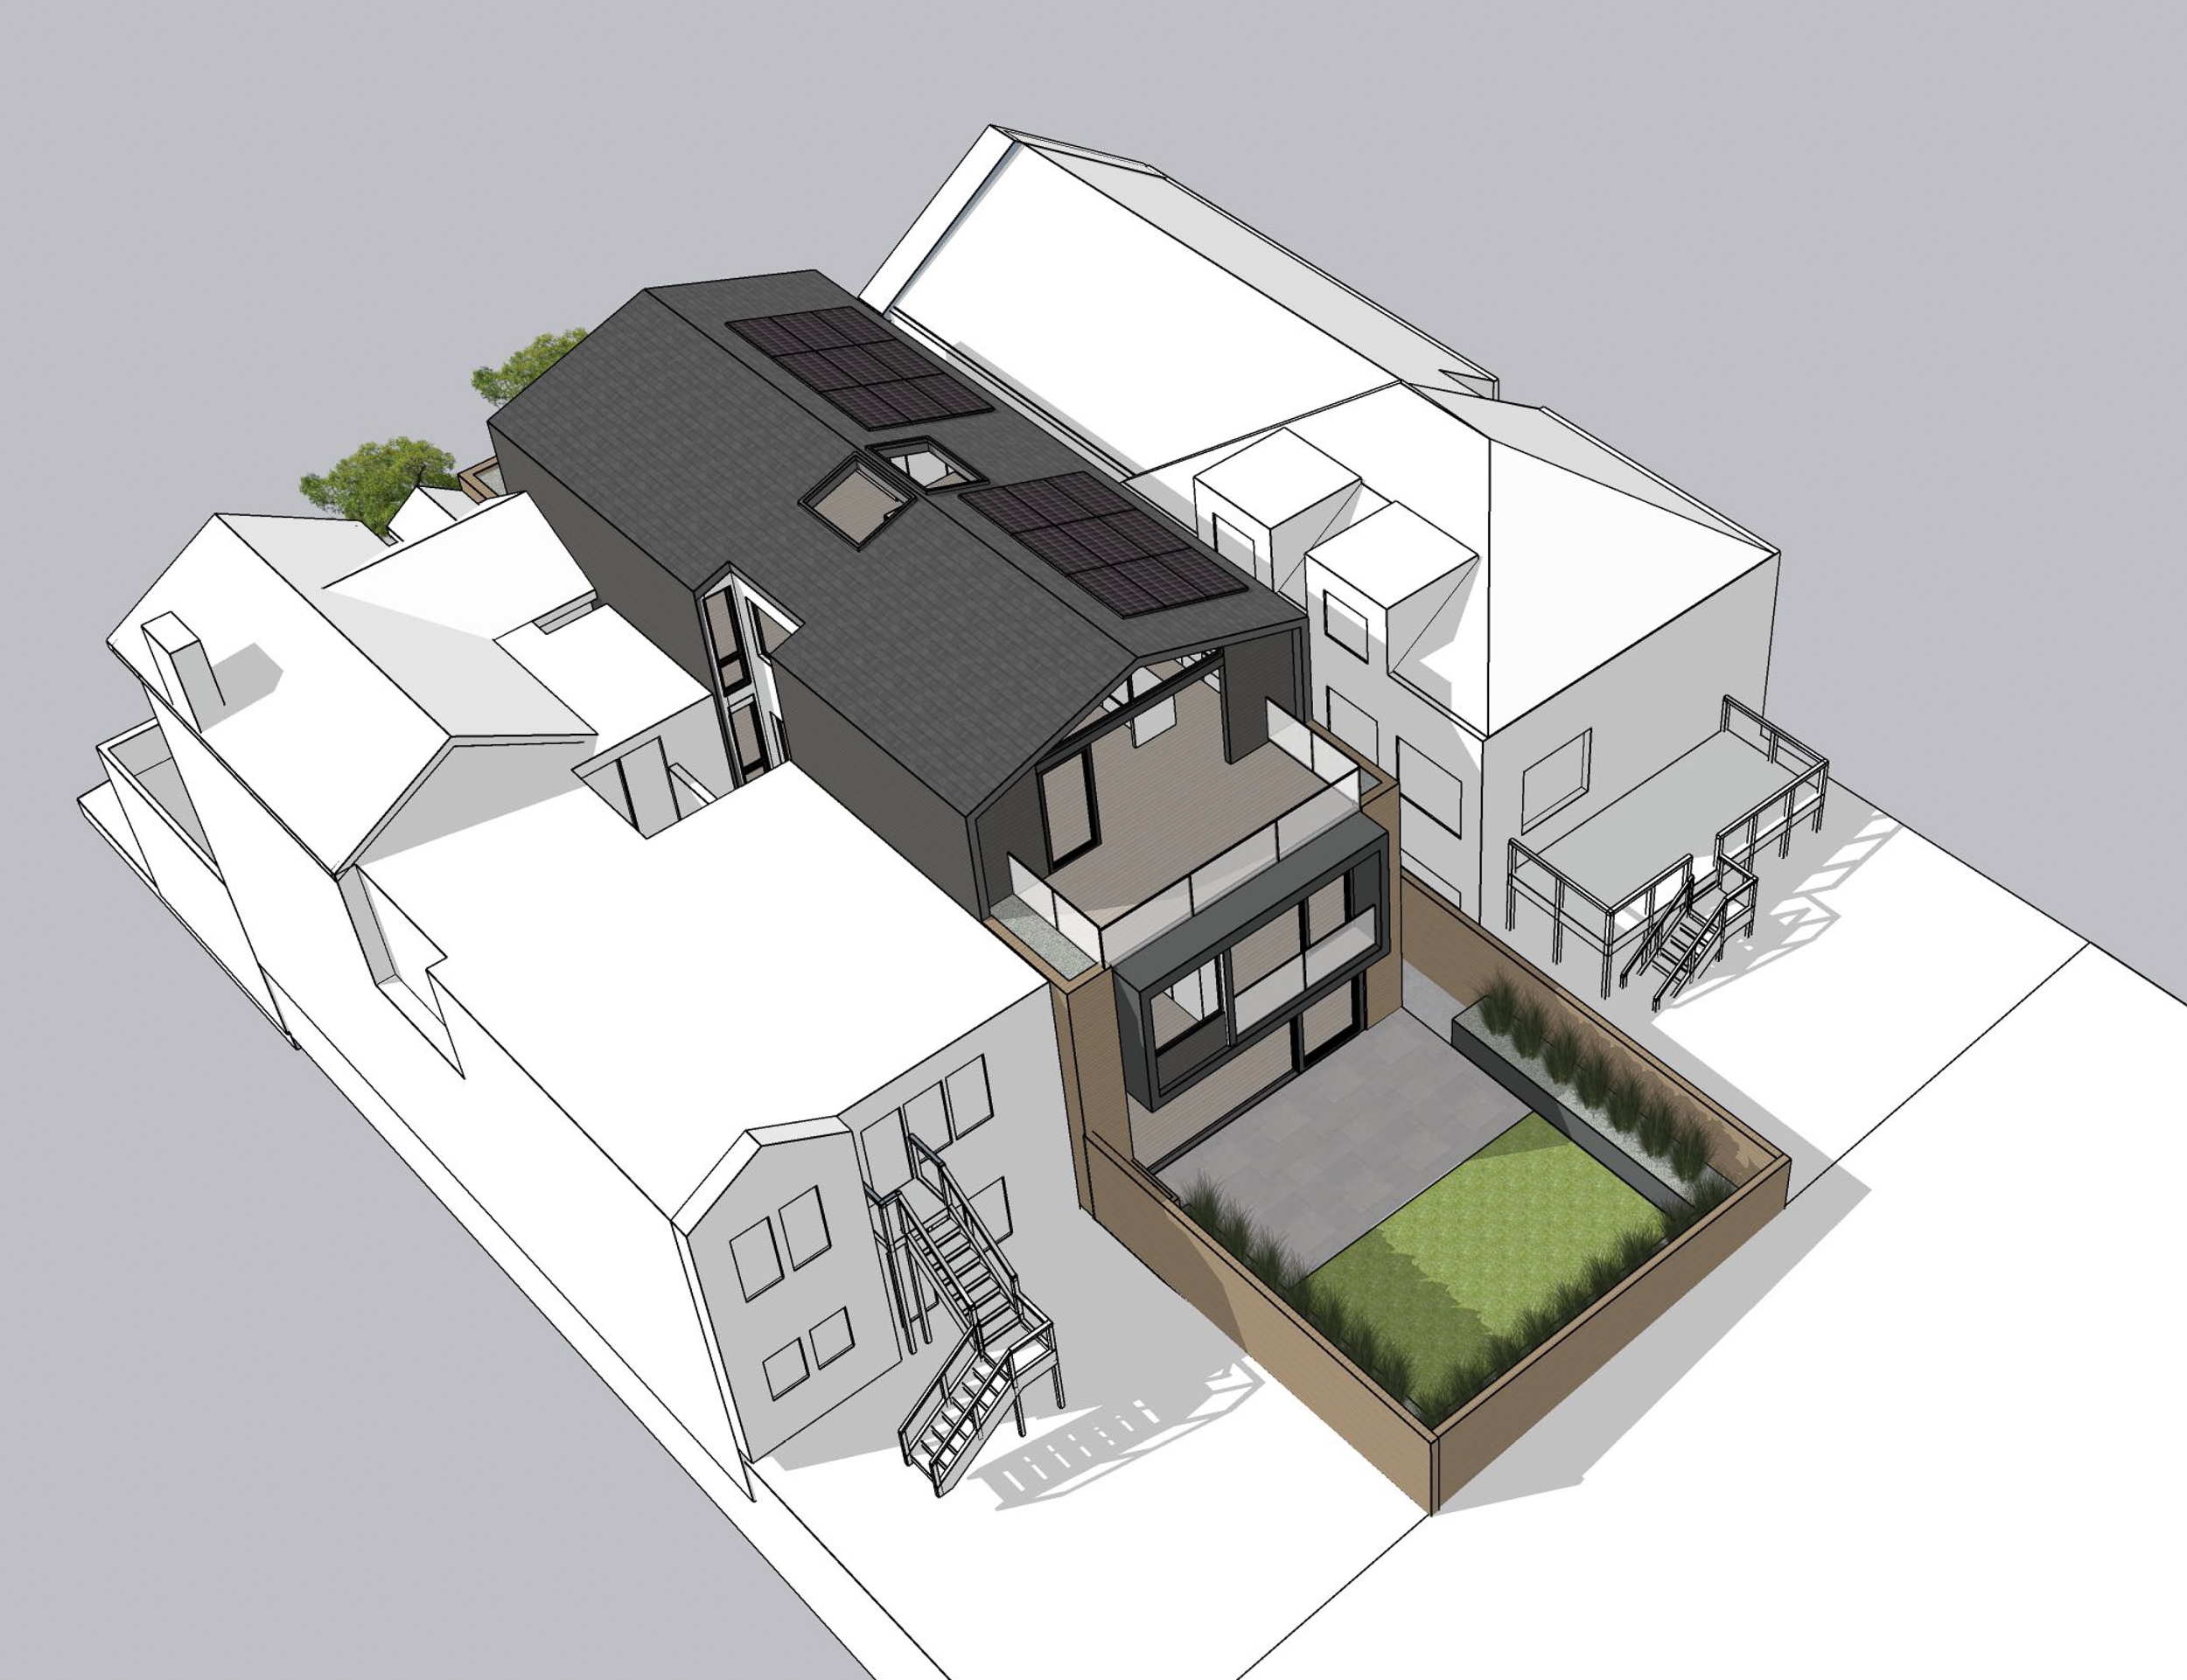 326 27th Street northeast aerial view, rendering by Knock Architecture and Design